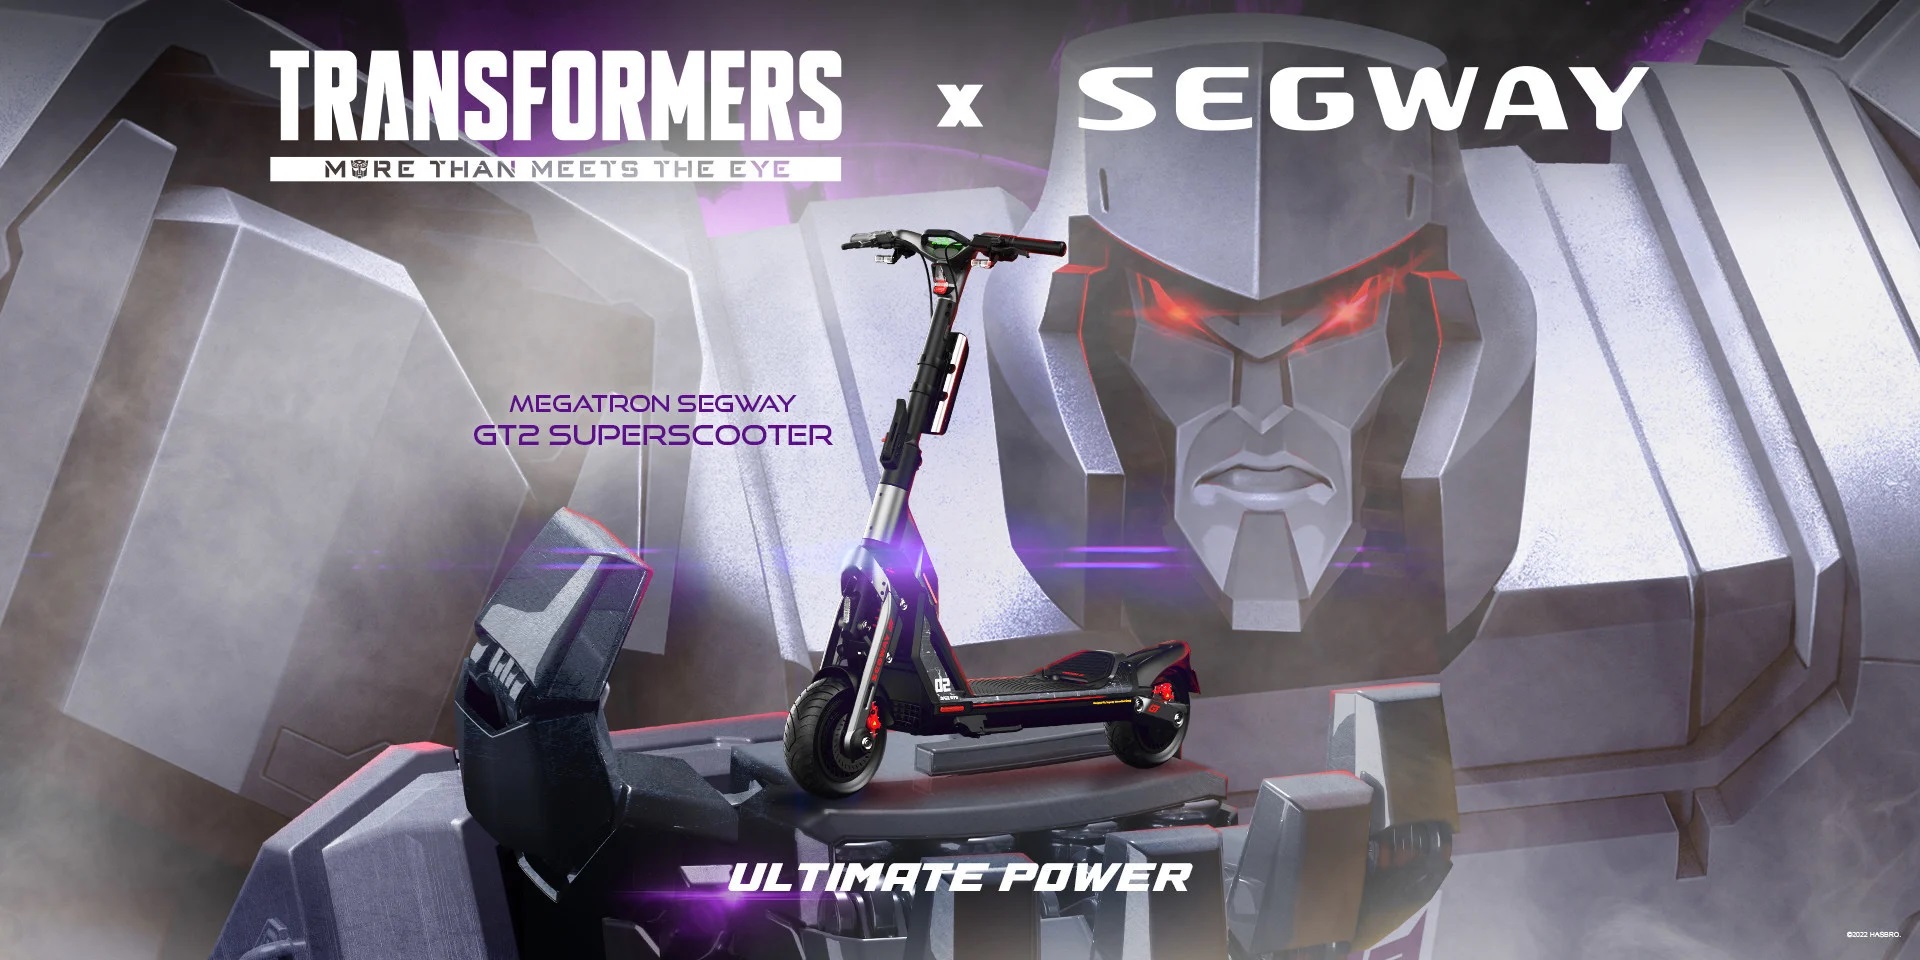 Segway-Ninebot and Hasbro released a limited edition of Transformers gokarts and e-scooters 